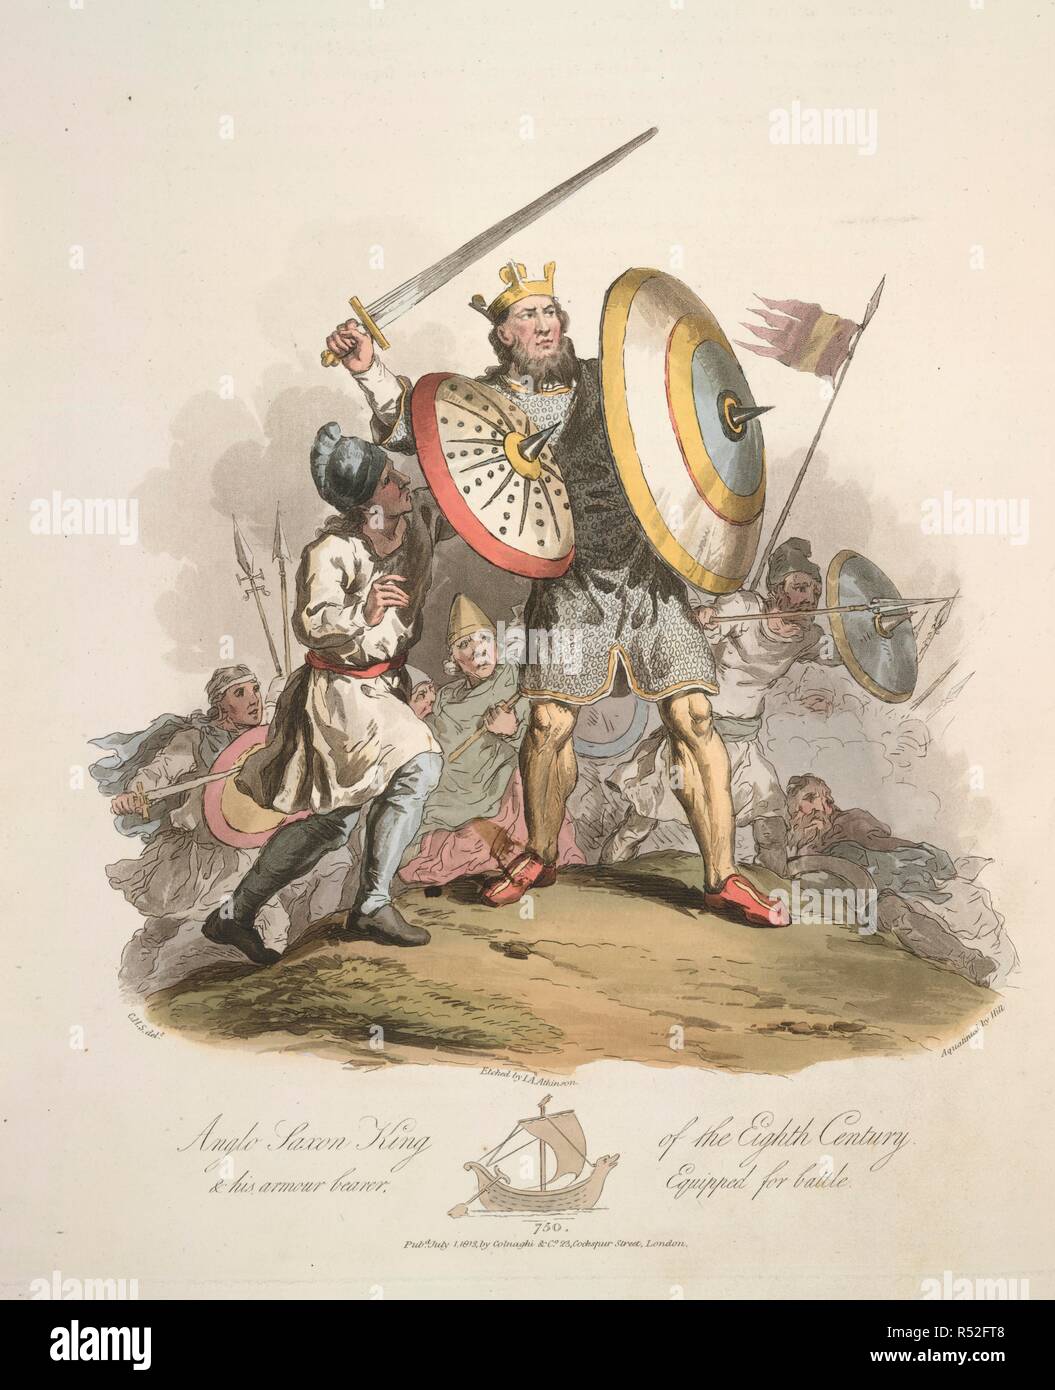 Anglo-Saxon king. The Costume of the original inhabitants of the Bri. R. Havell: London, 1815. Anglo-Saxon king and his armour-bearer equipped for battle. Anno 750.The king wears a golden crown surmounted by three fleur de lys. He wears body armour, a costume of iron rings.  Image taken from The Costume of the original inhabitants of the British Islands from the earliest periods to the sixth century, to which is added that of theGothic nations on the Western Coasts of the Baltic, the ancestors of the Anglo-saxons and Anglo-Danes..  Originally published/produced in R. Havell: London, 1815. . So Stock Photo